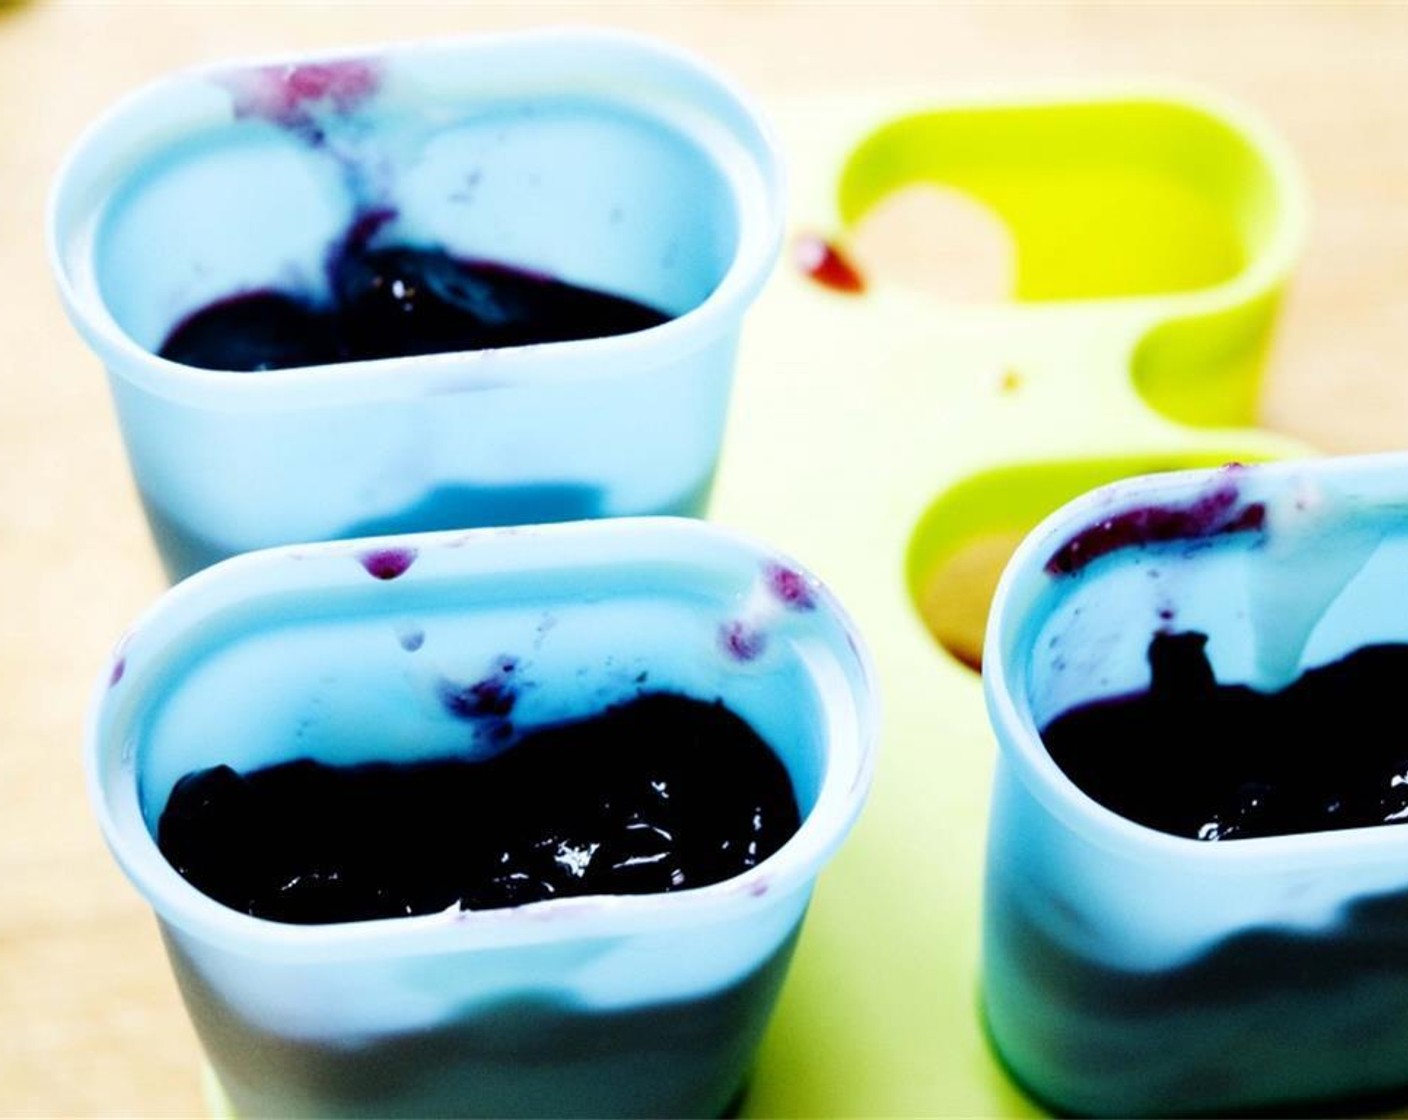 step 4 In your popsicle molds, pour one tablespoon of blueberries, followed by one tablespoon of yogurt then blueberries again.